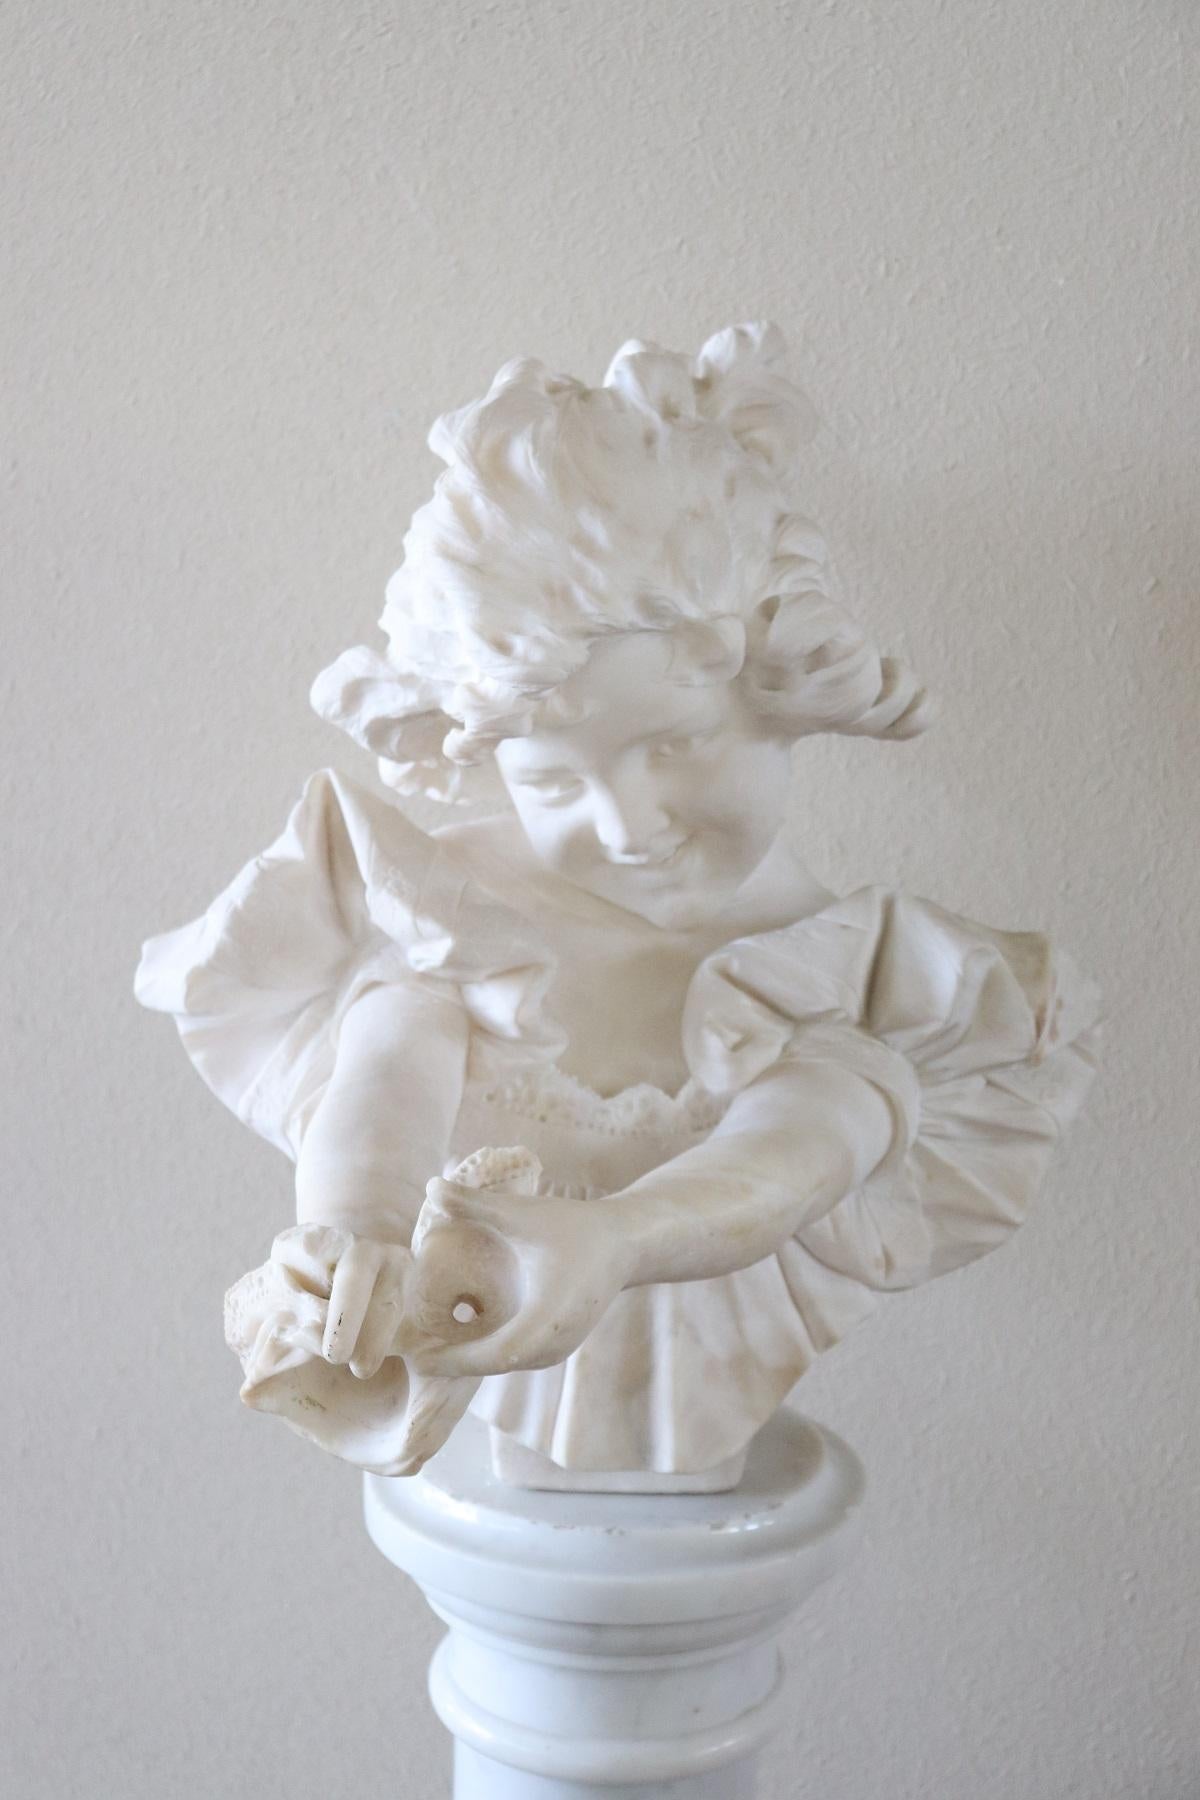 Beautiful bust of a beautiful child in white Carrara marble signed A. Frilli important Italian lorentine sculptor active between the late 1800s and early 1900s. This bust is sculpted with rare precision typical of the best Italian sculptors. The